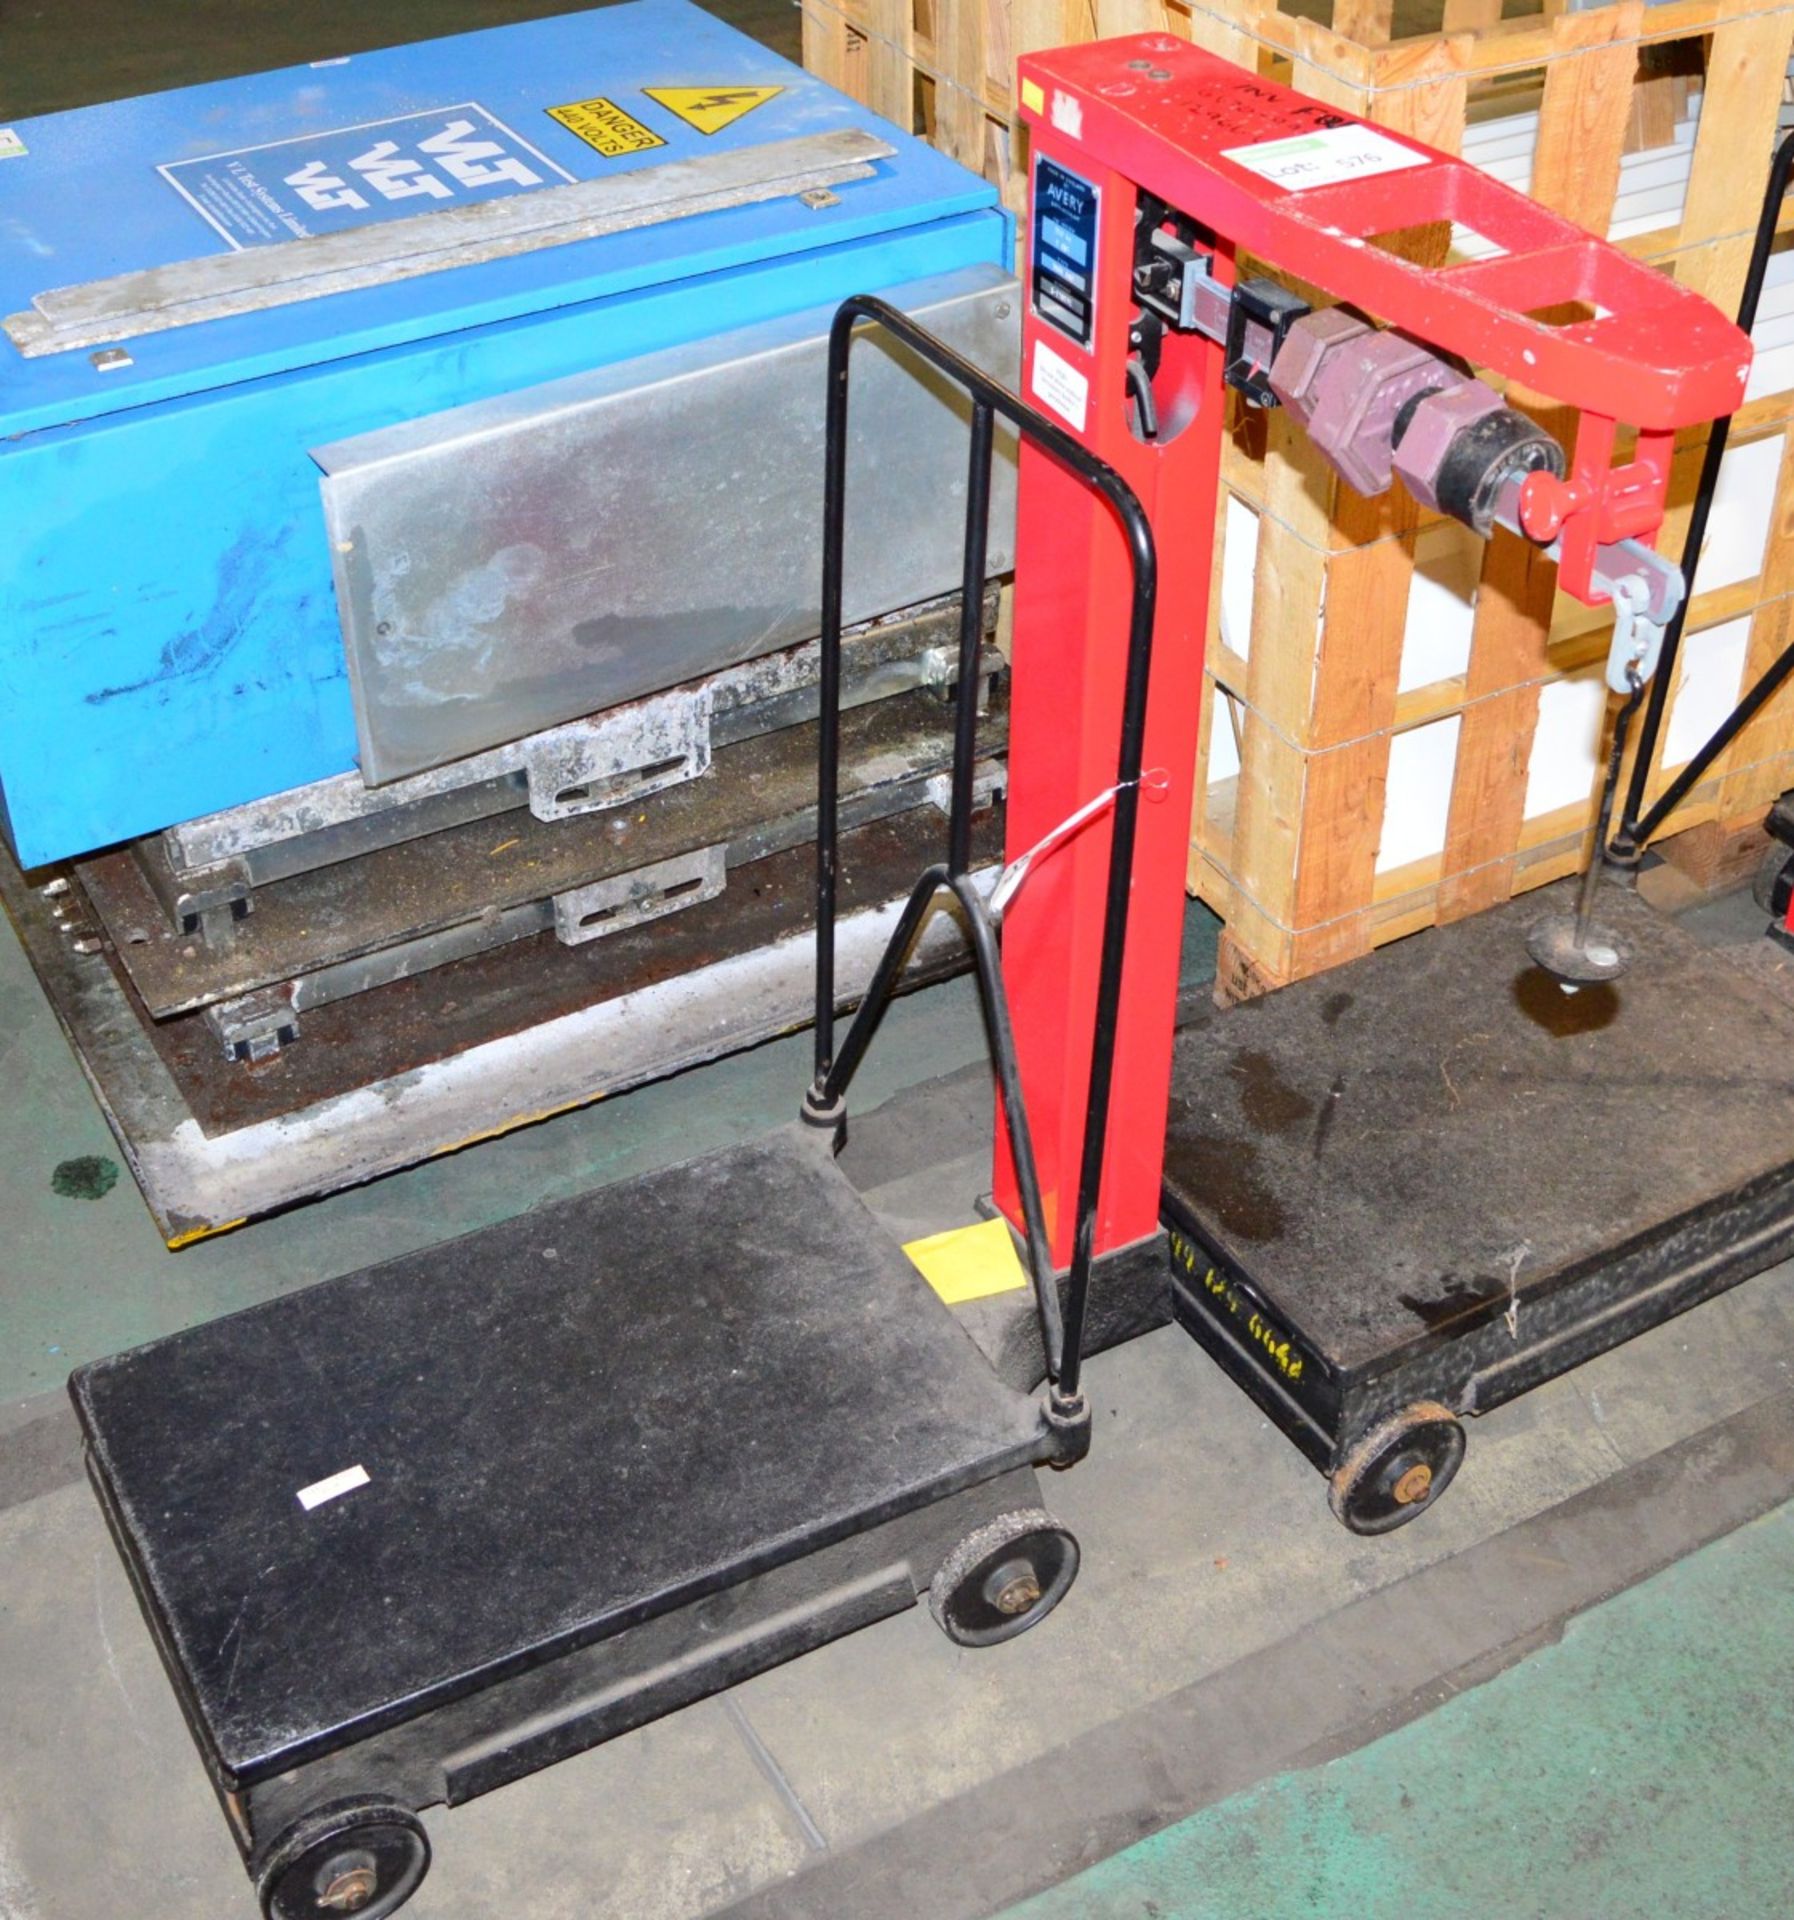 Avery Weighing Scales 250kg Type 3901 AAG